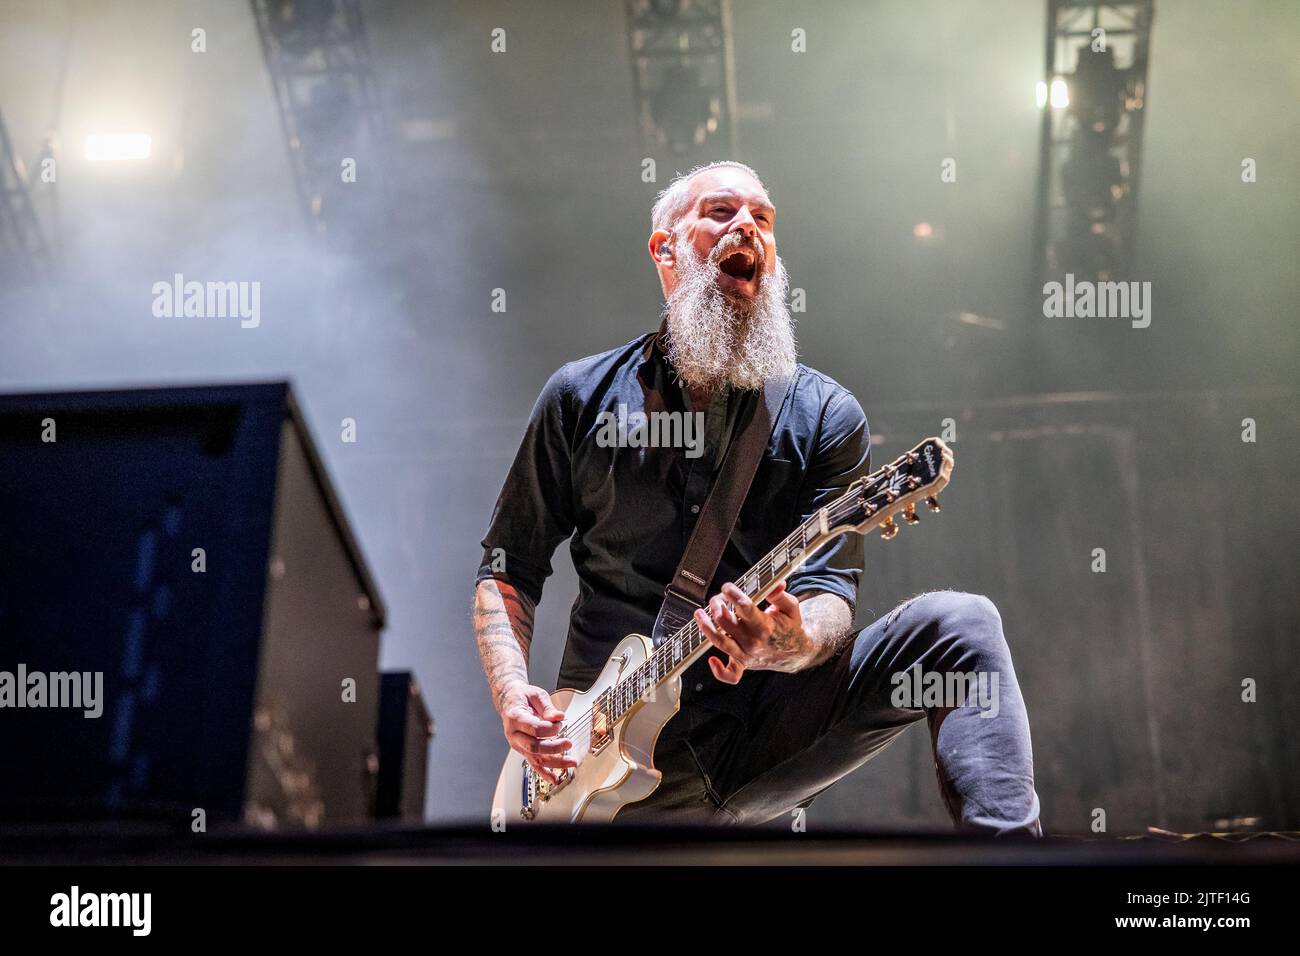 Solvesborg, Sweden. 10th, June 2022. The Swedish heavy metal band In Flames performs a live concert during the Swedish music festival Sweden Rock Festival 2022 in Solvesborg. Here guitarist Bjorn Gelotte is seen live on stage. (Photo credit: Gonzales Photo - Terje Dokken). Stock Photo